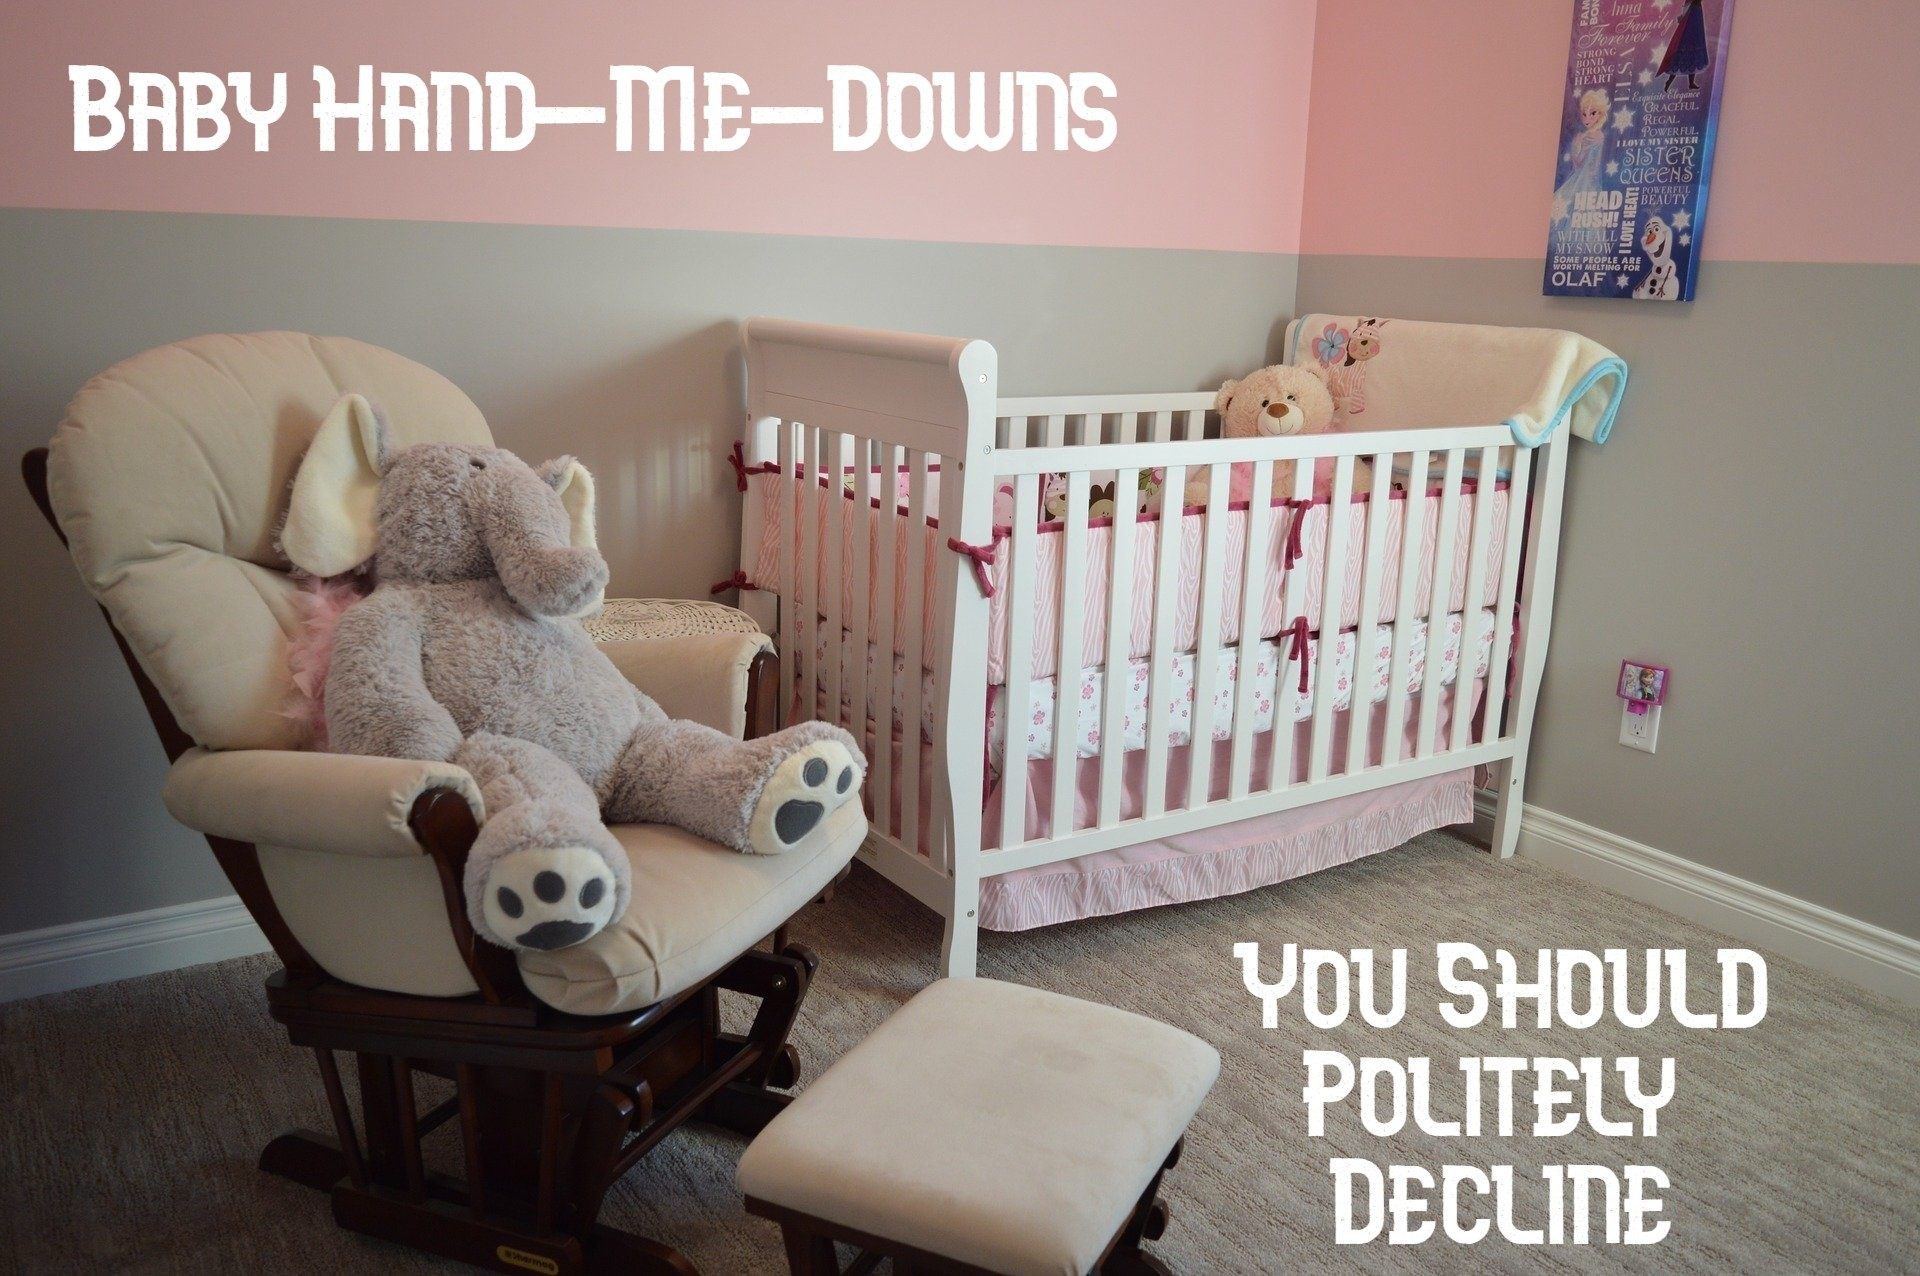 Hand-me-downs to decline